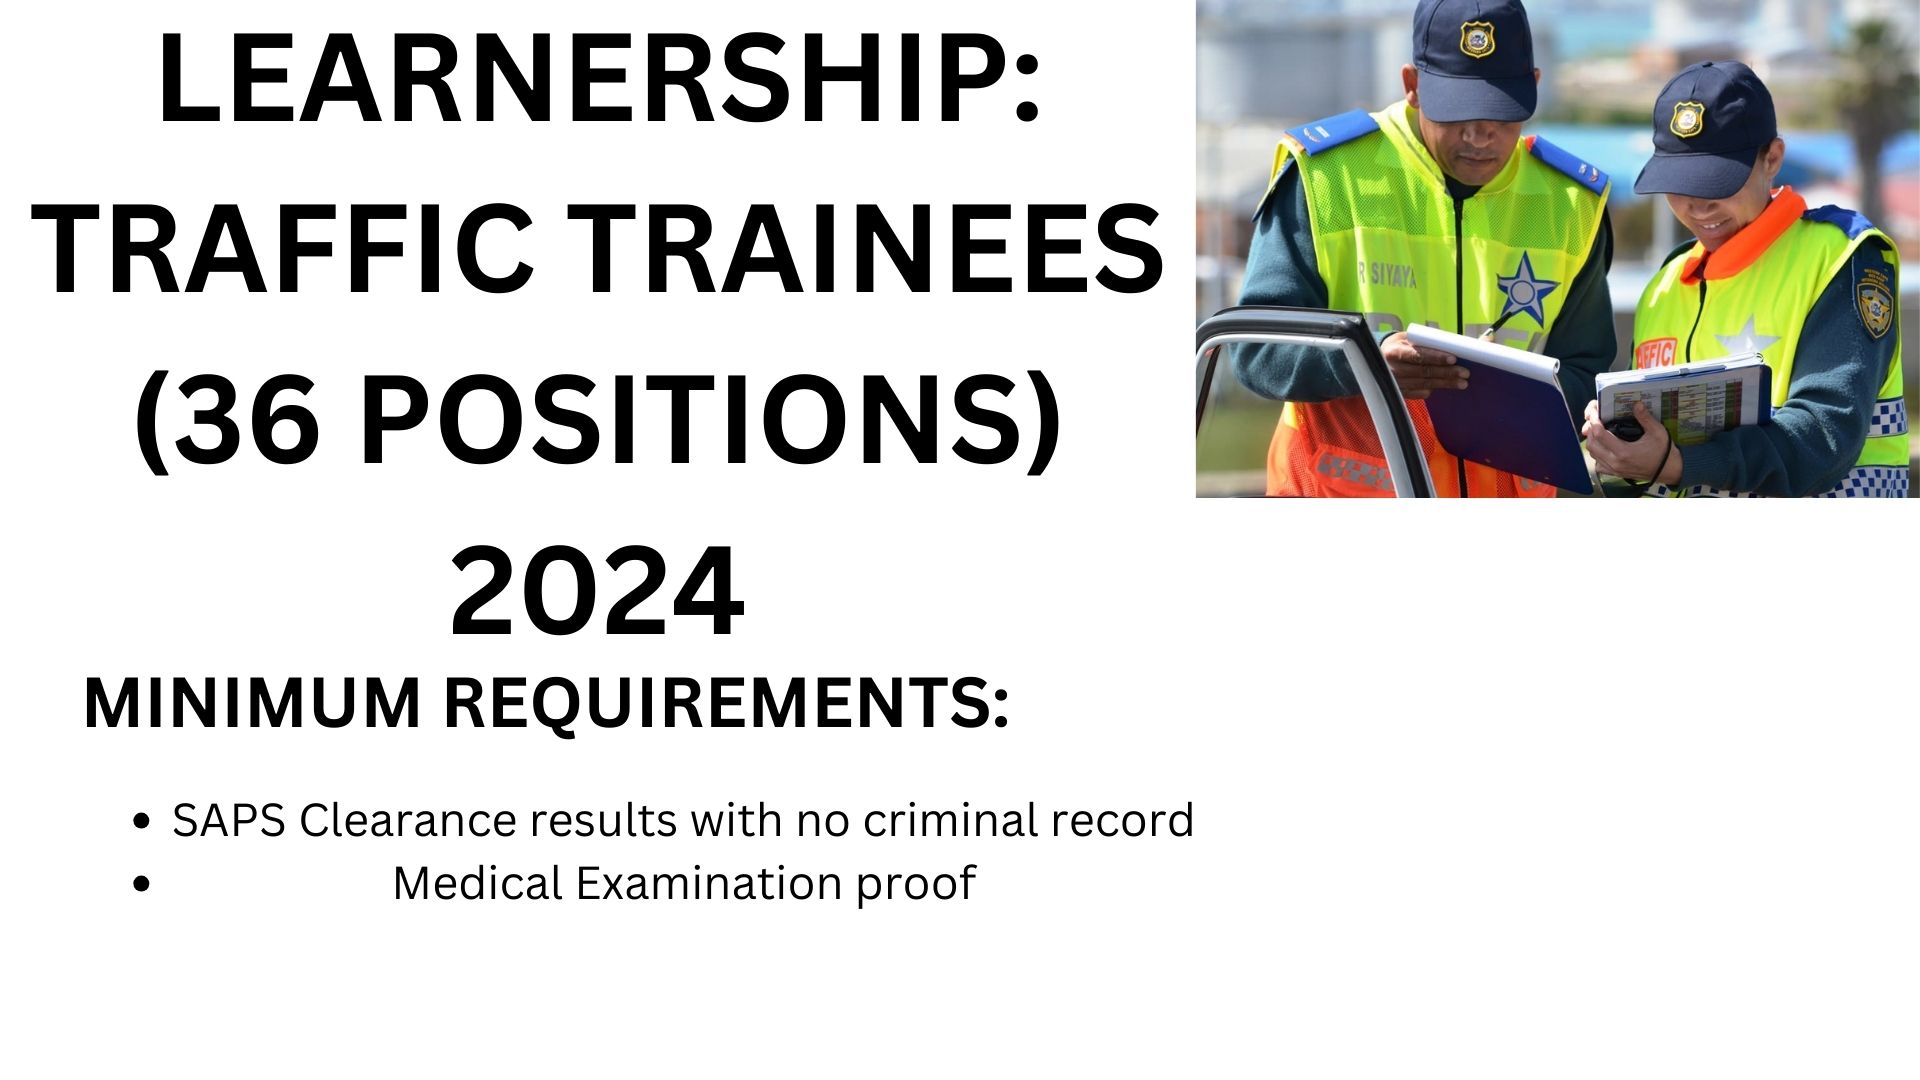 LEARNERSHIP TRAFFIC TRAINEES (36 POSITIONS) 2024